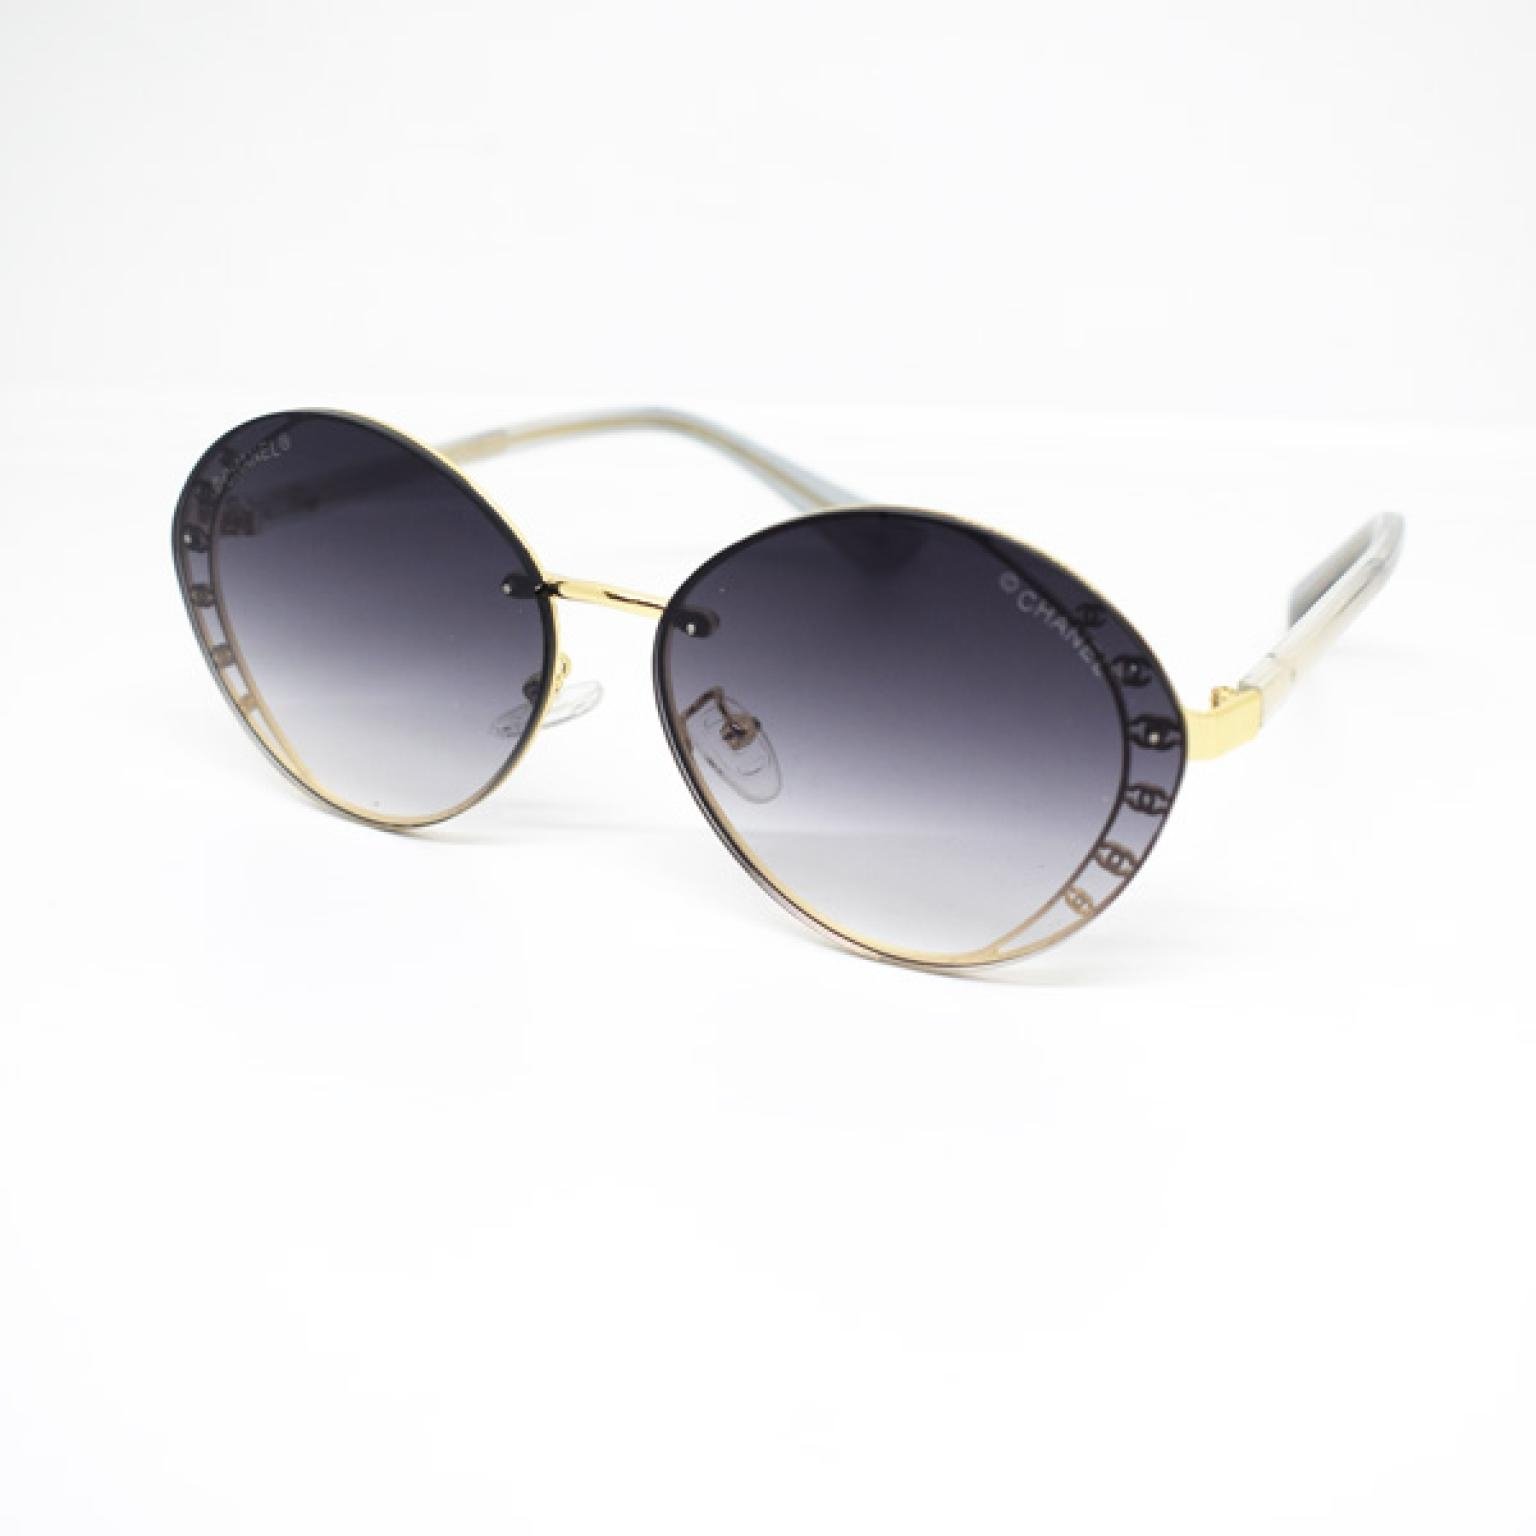 Ladies Fashionable Trendy Sunglass shade Lens With Golden Frame For Women Cat Eye Glass